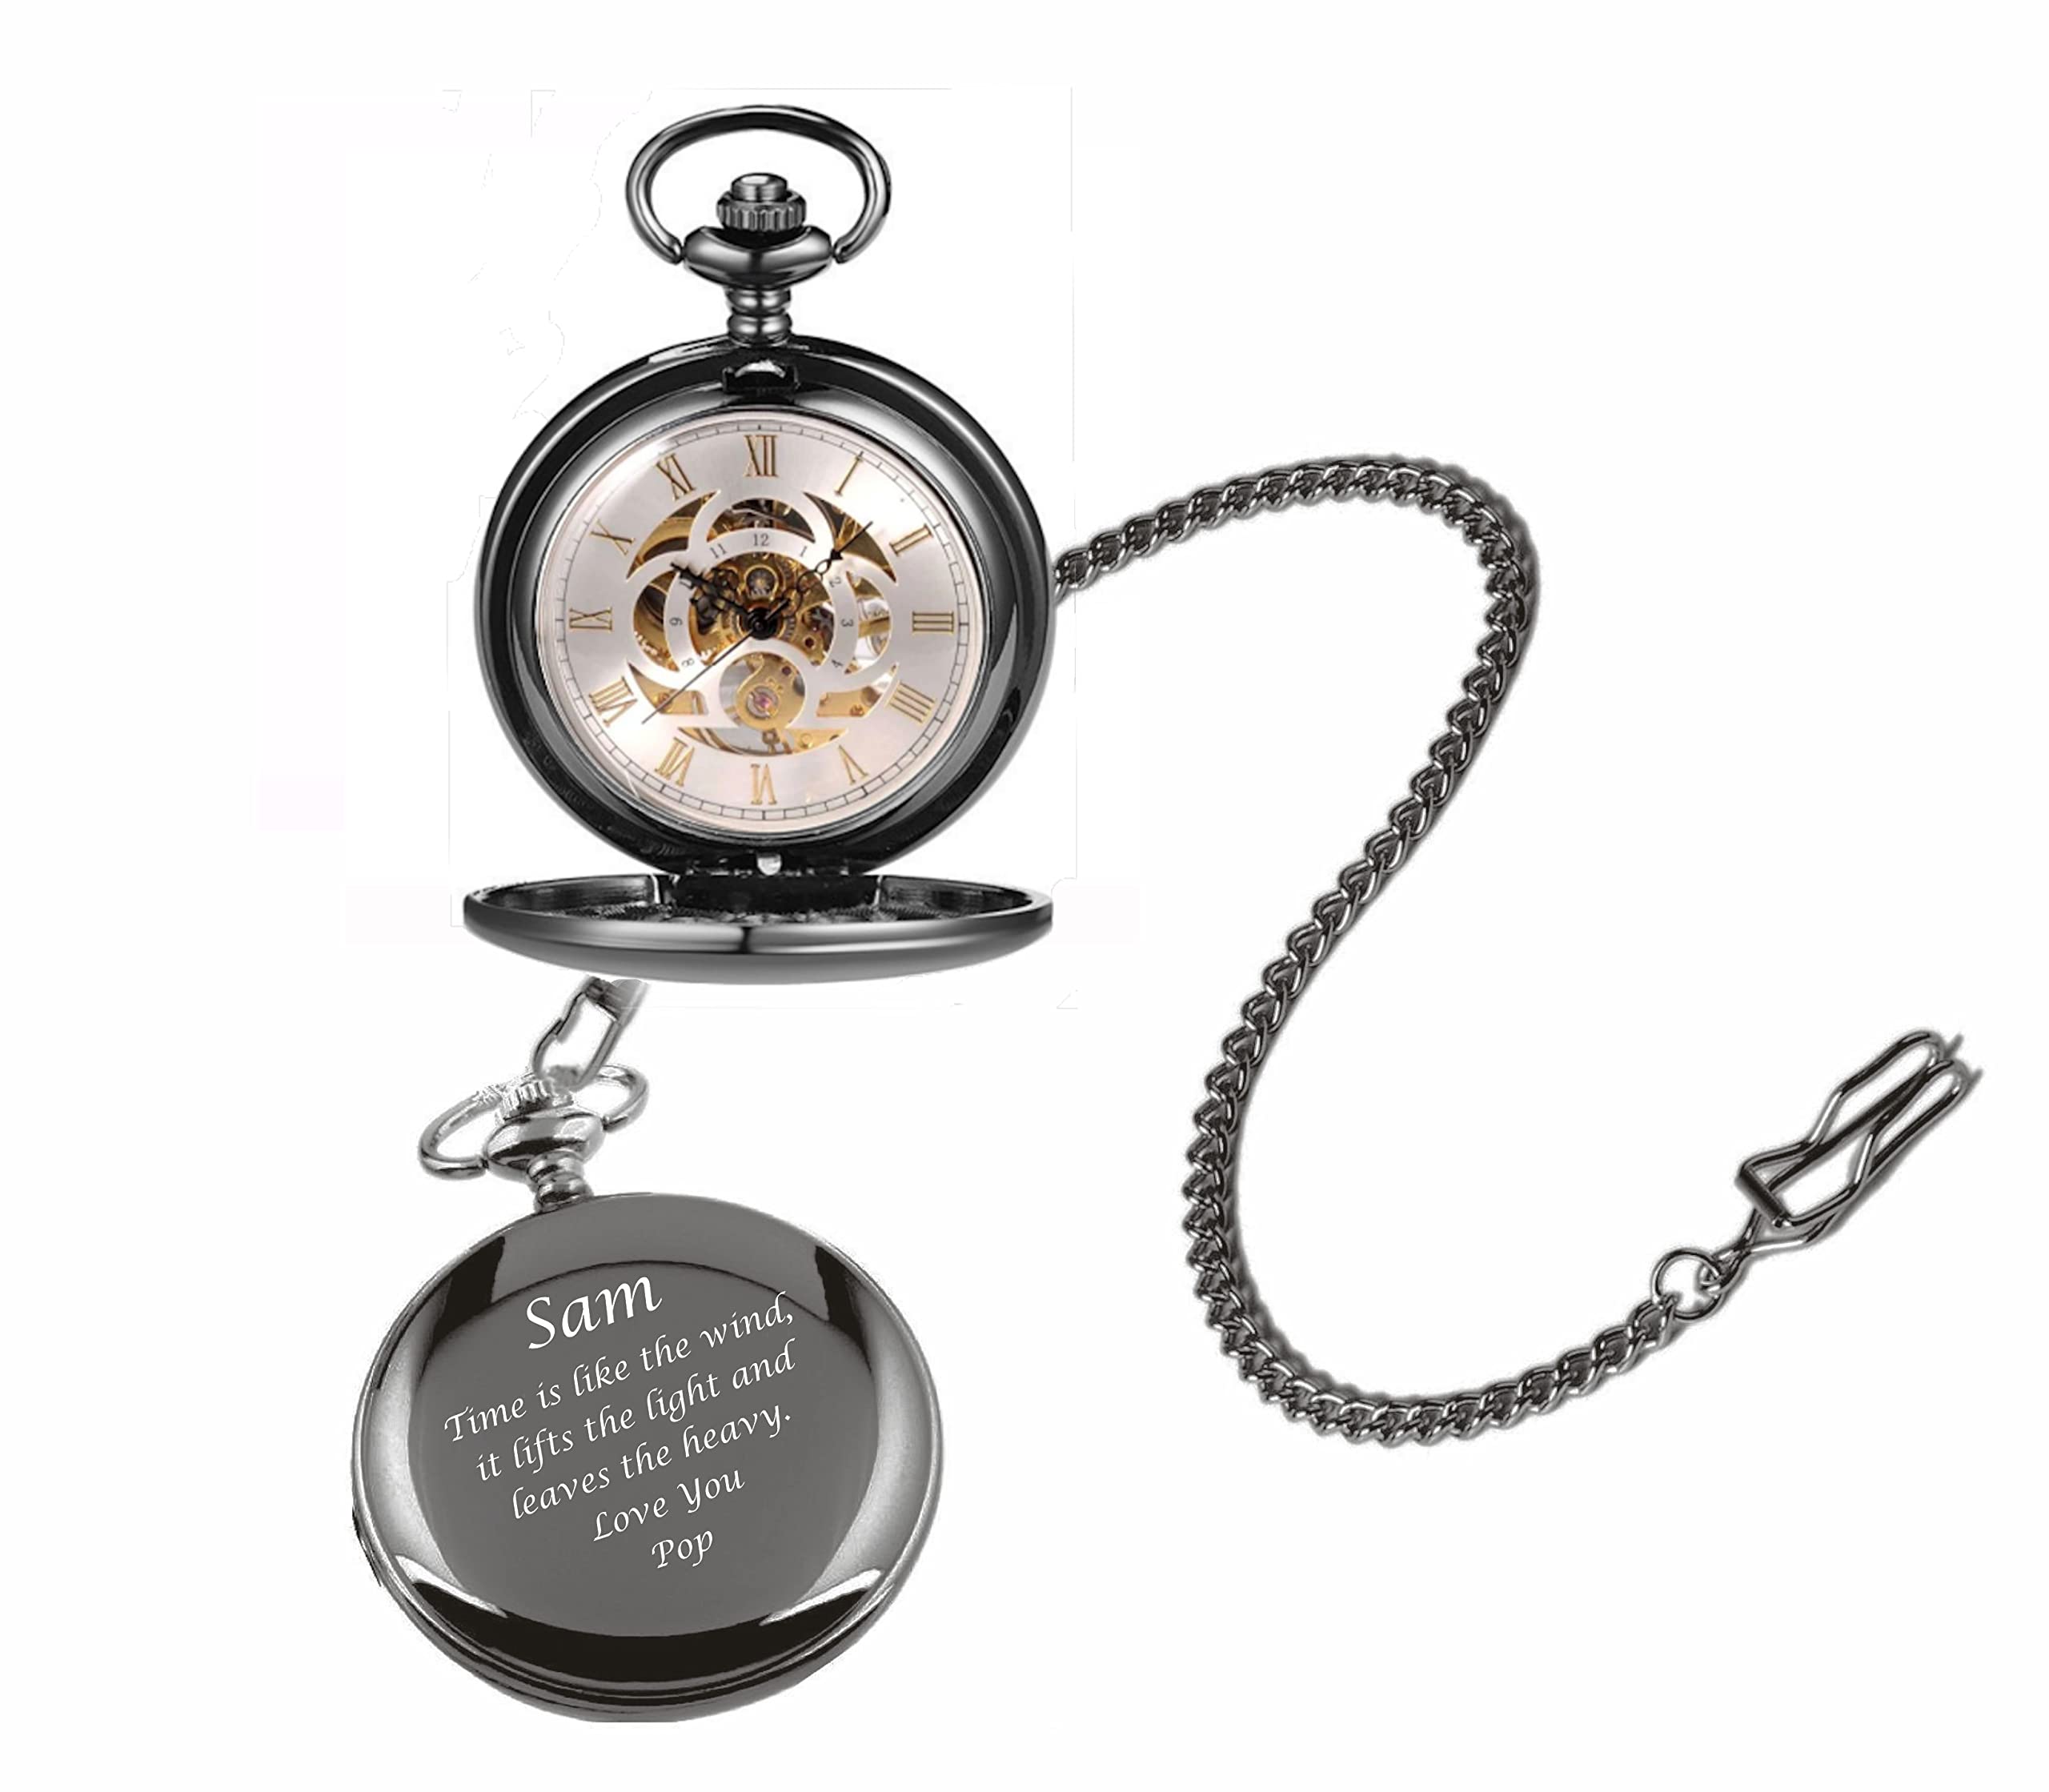 Personalized Antique Mechanical Movement Gunmetal Pocket Watch Custom Engraved Free with Gift Box - Ships from USA, PW51